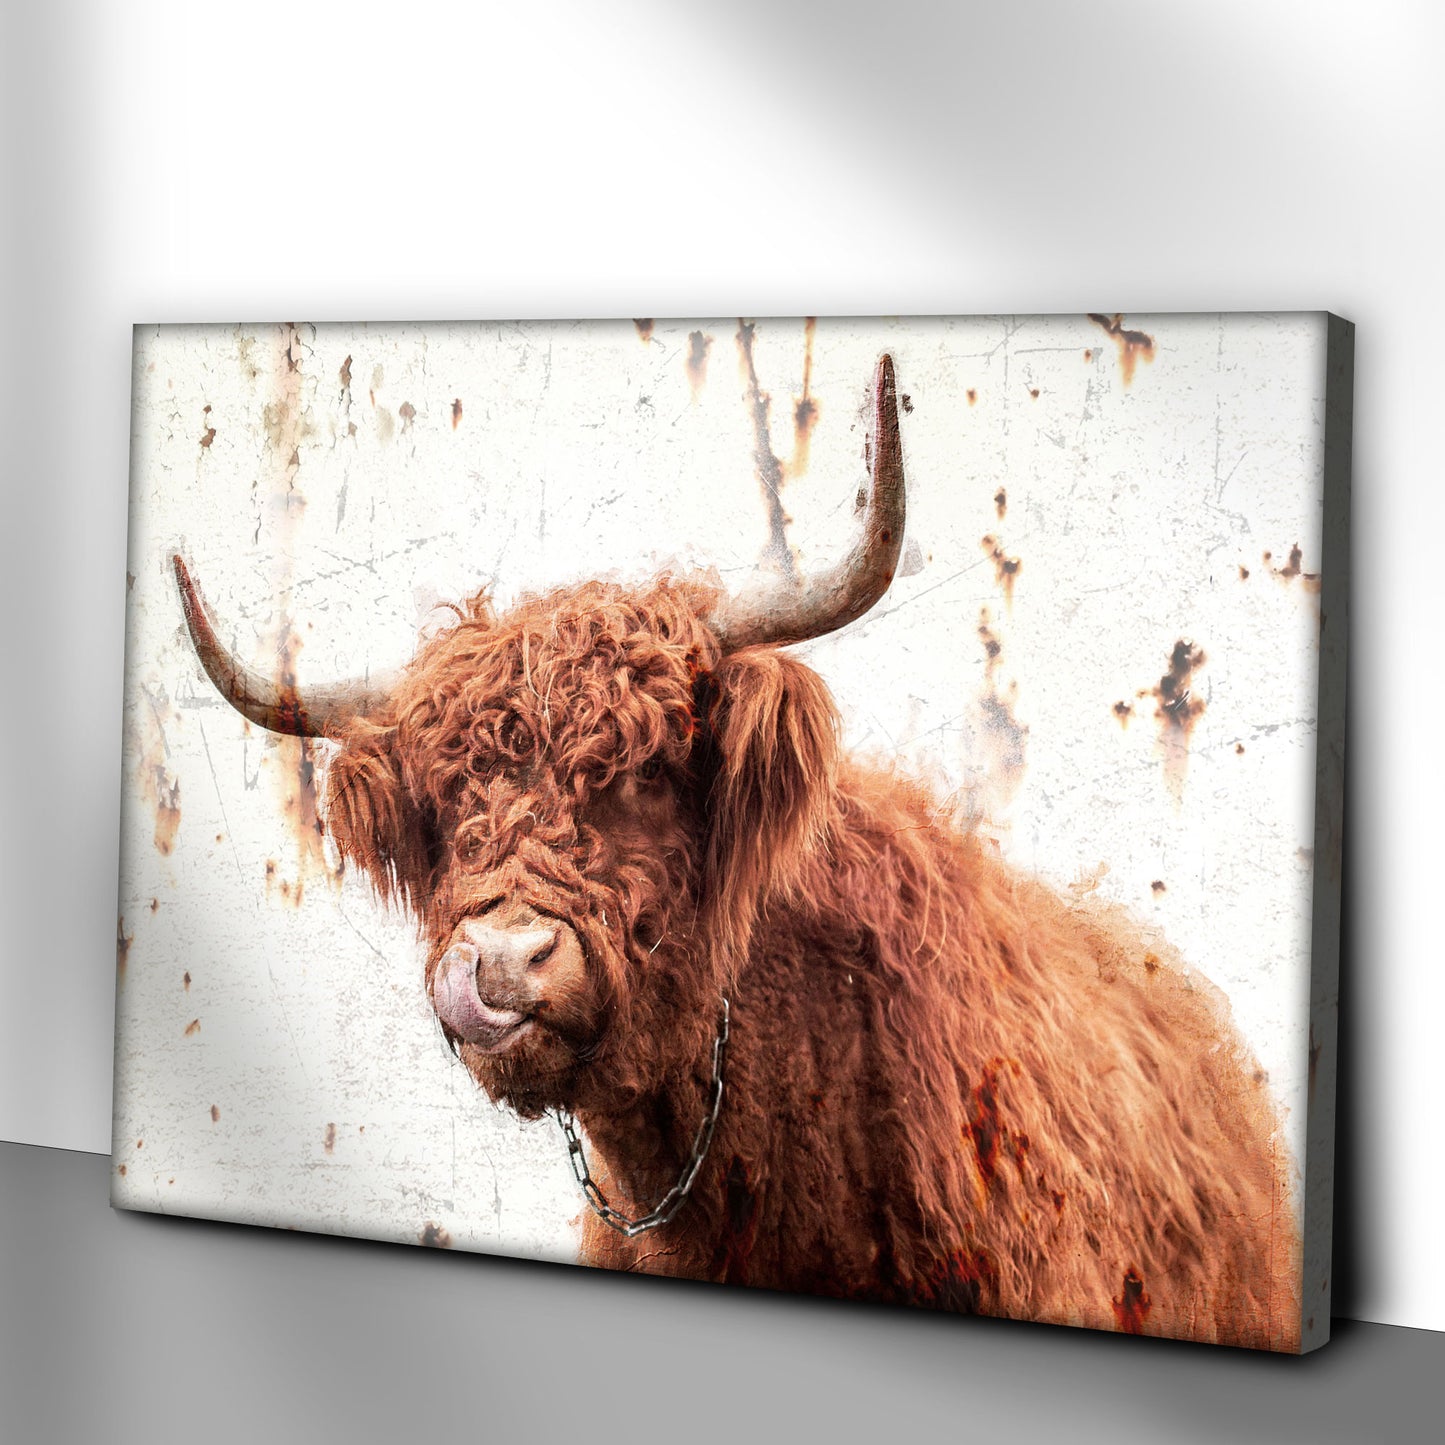 Rustic Highland Cow Canvas Wall Art Style 1 - Image by Tailored Canvases